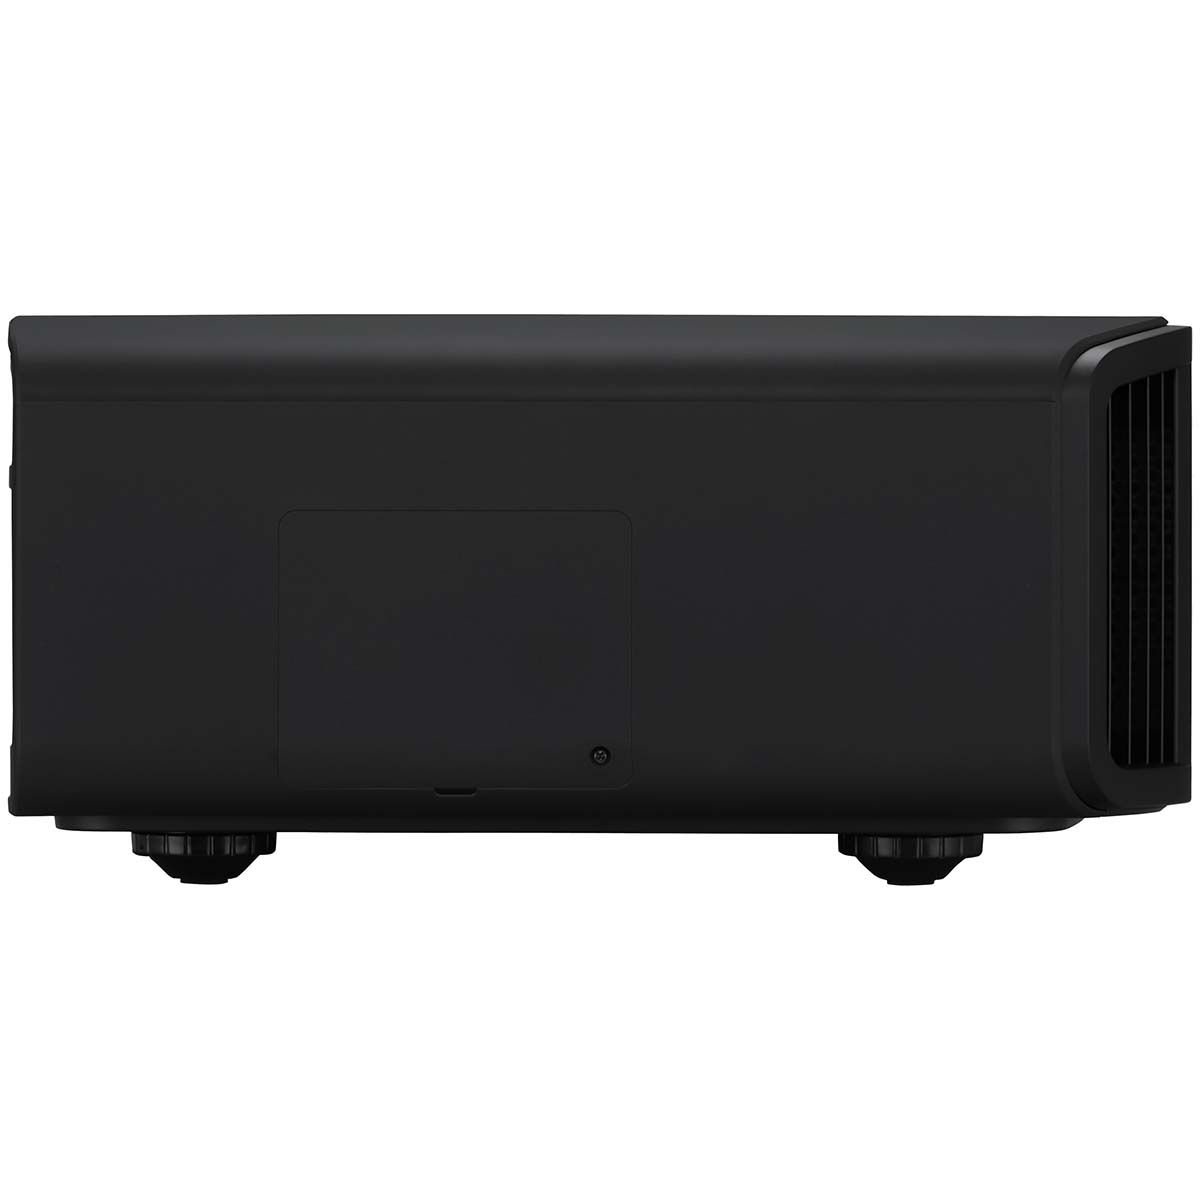 JVC DLA-NP5 4K Home Theater Projector, side view